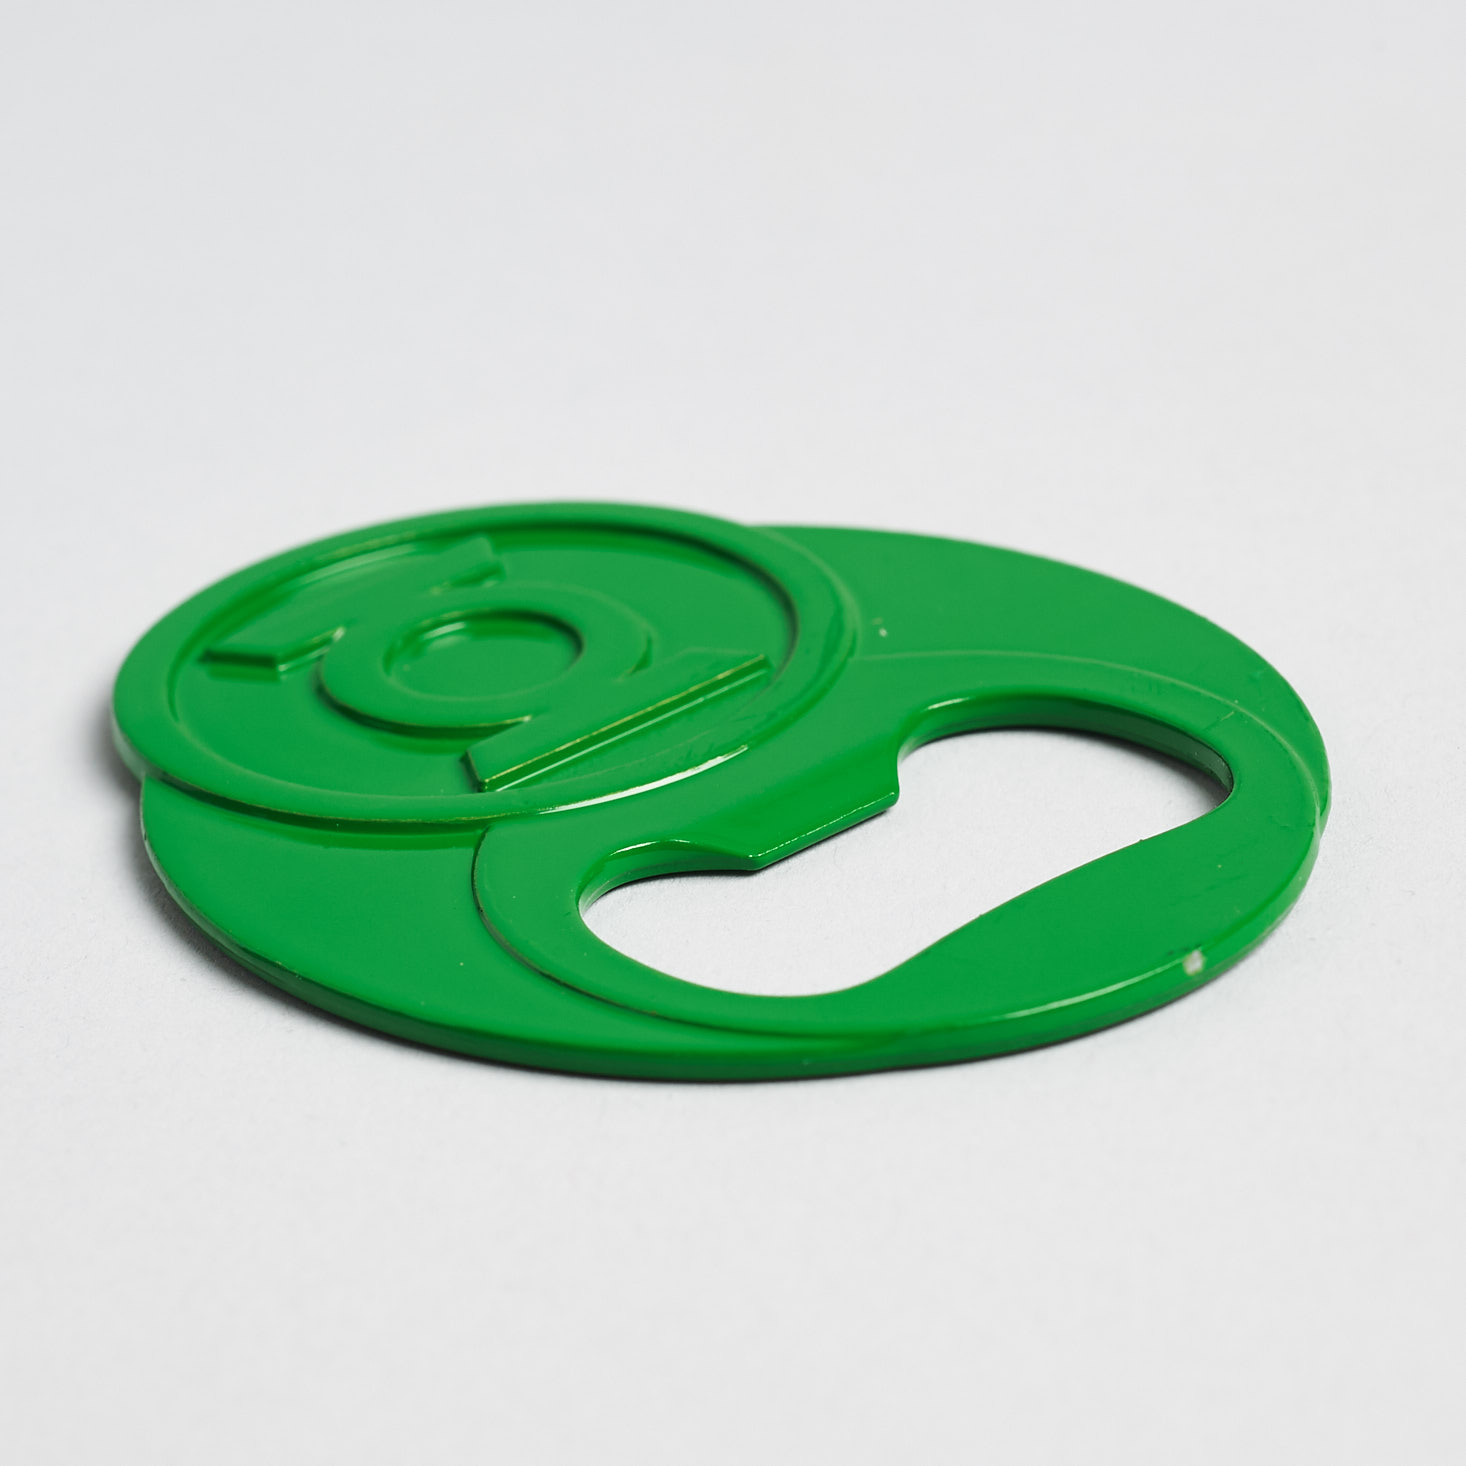 Worlds Finest Collection Green Lantern May 2019 review bottle opener detail